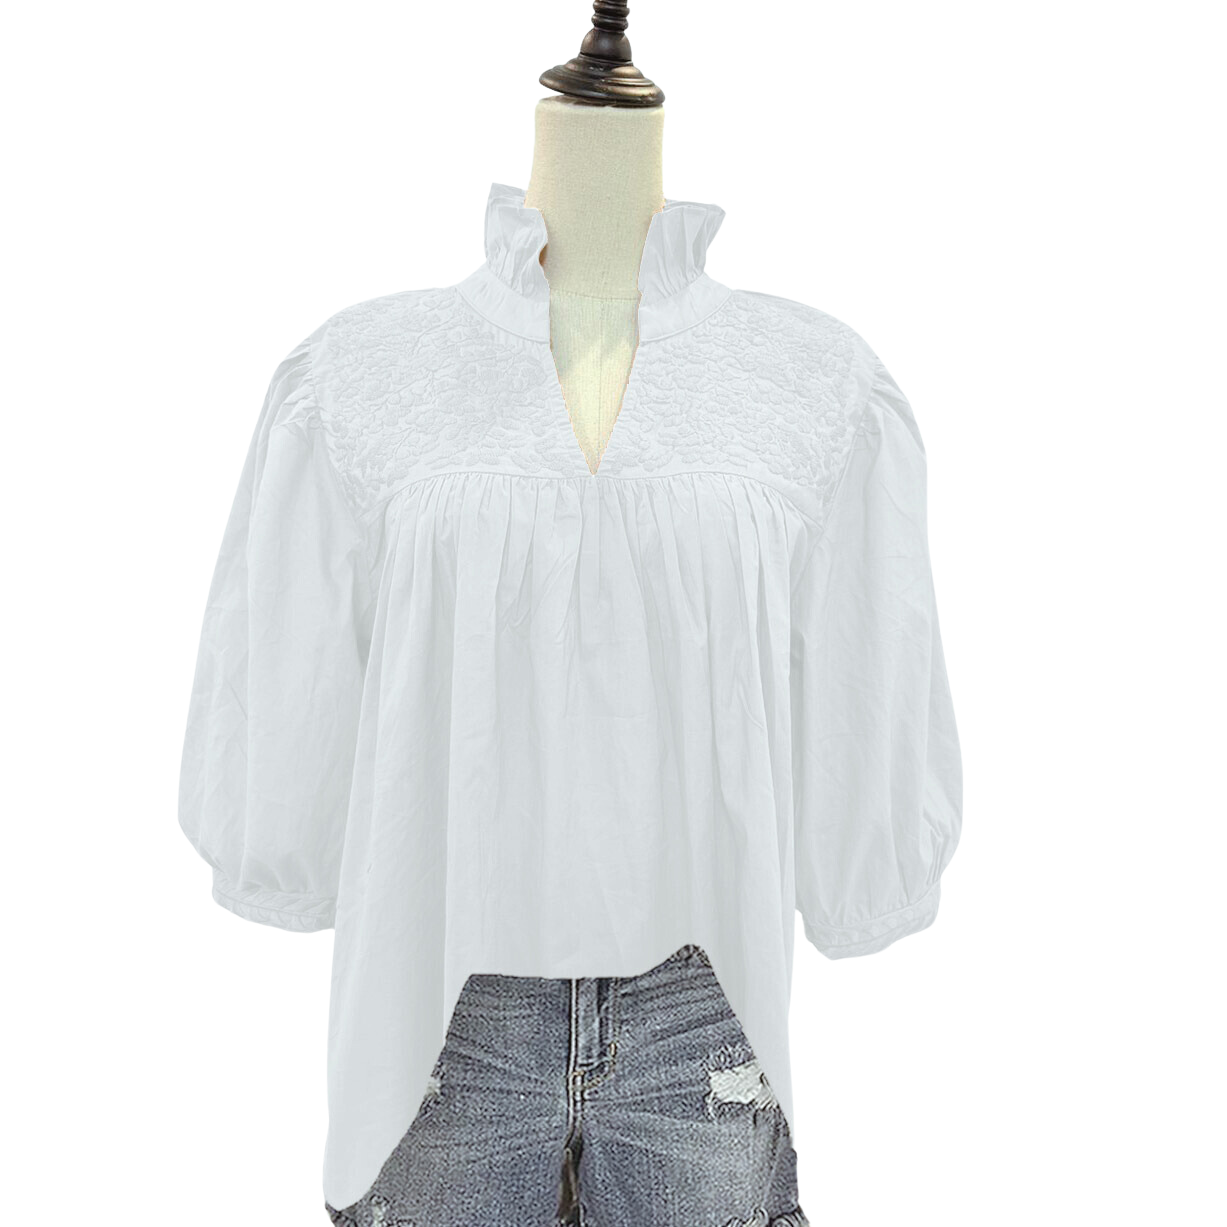 PRE-ORDER: Double White Ultimate Tailgater Blouse (early June ship date)